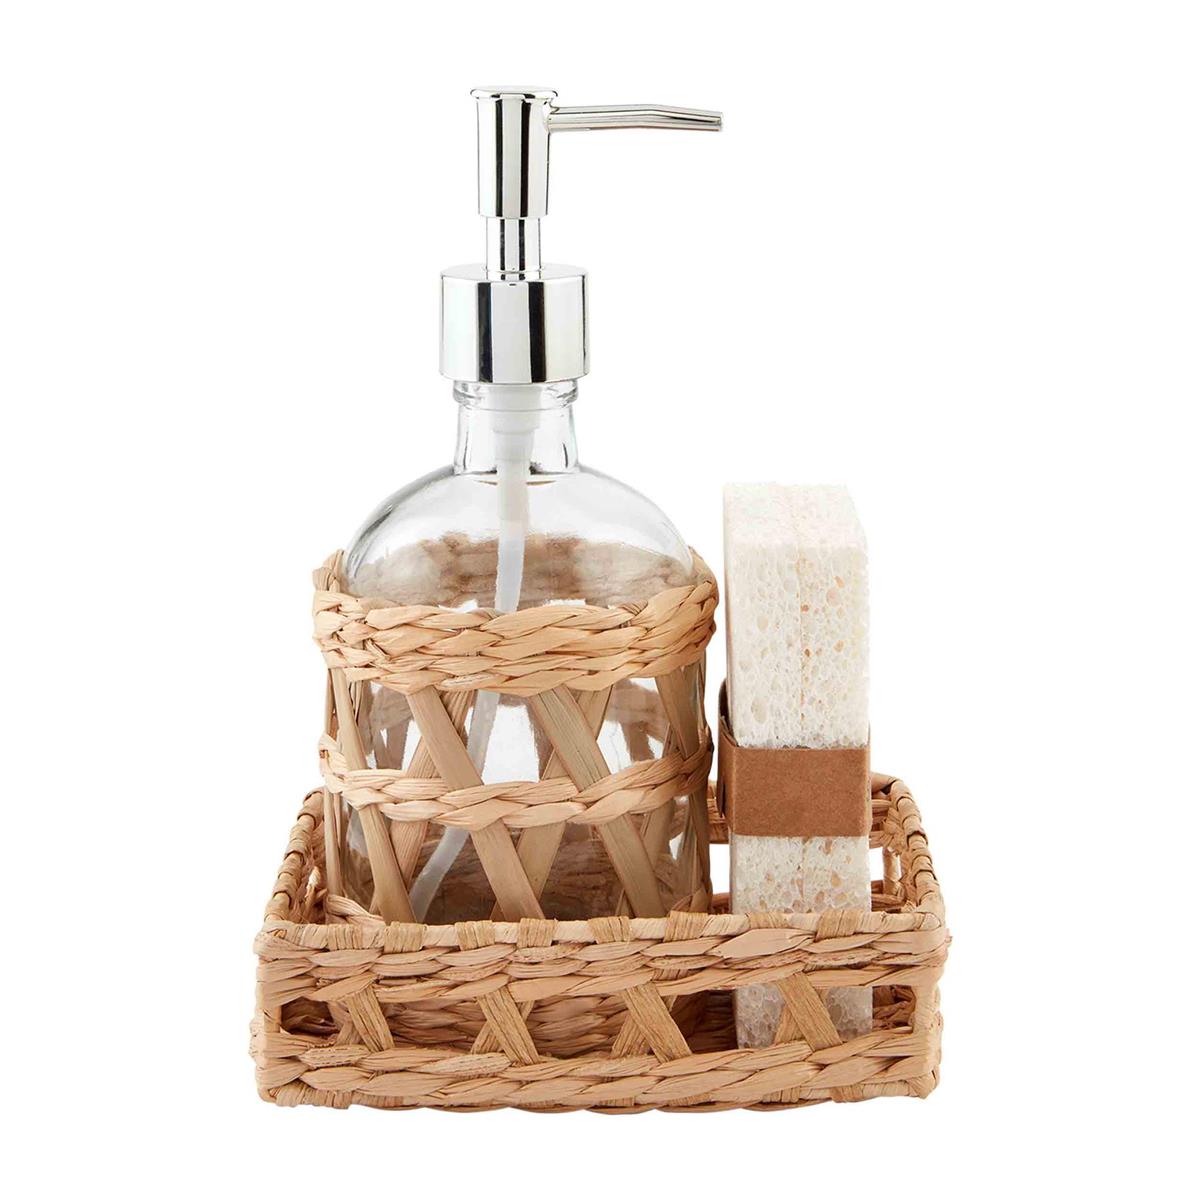 Woven Tray & Soap Pump Set by Mud Pie